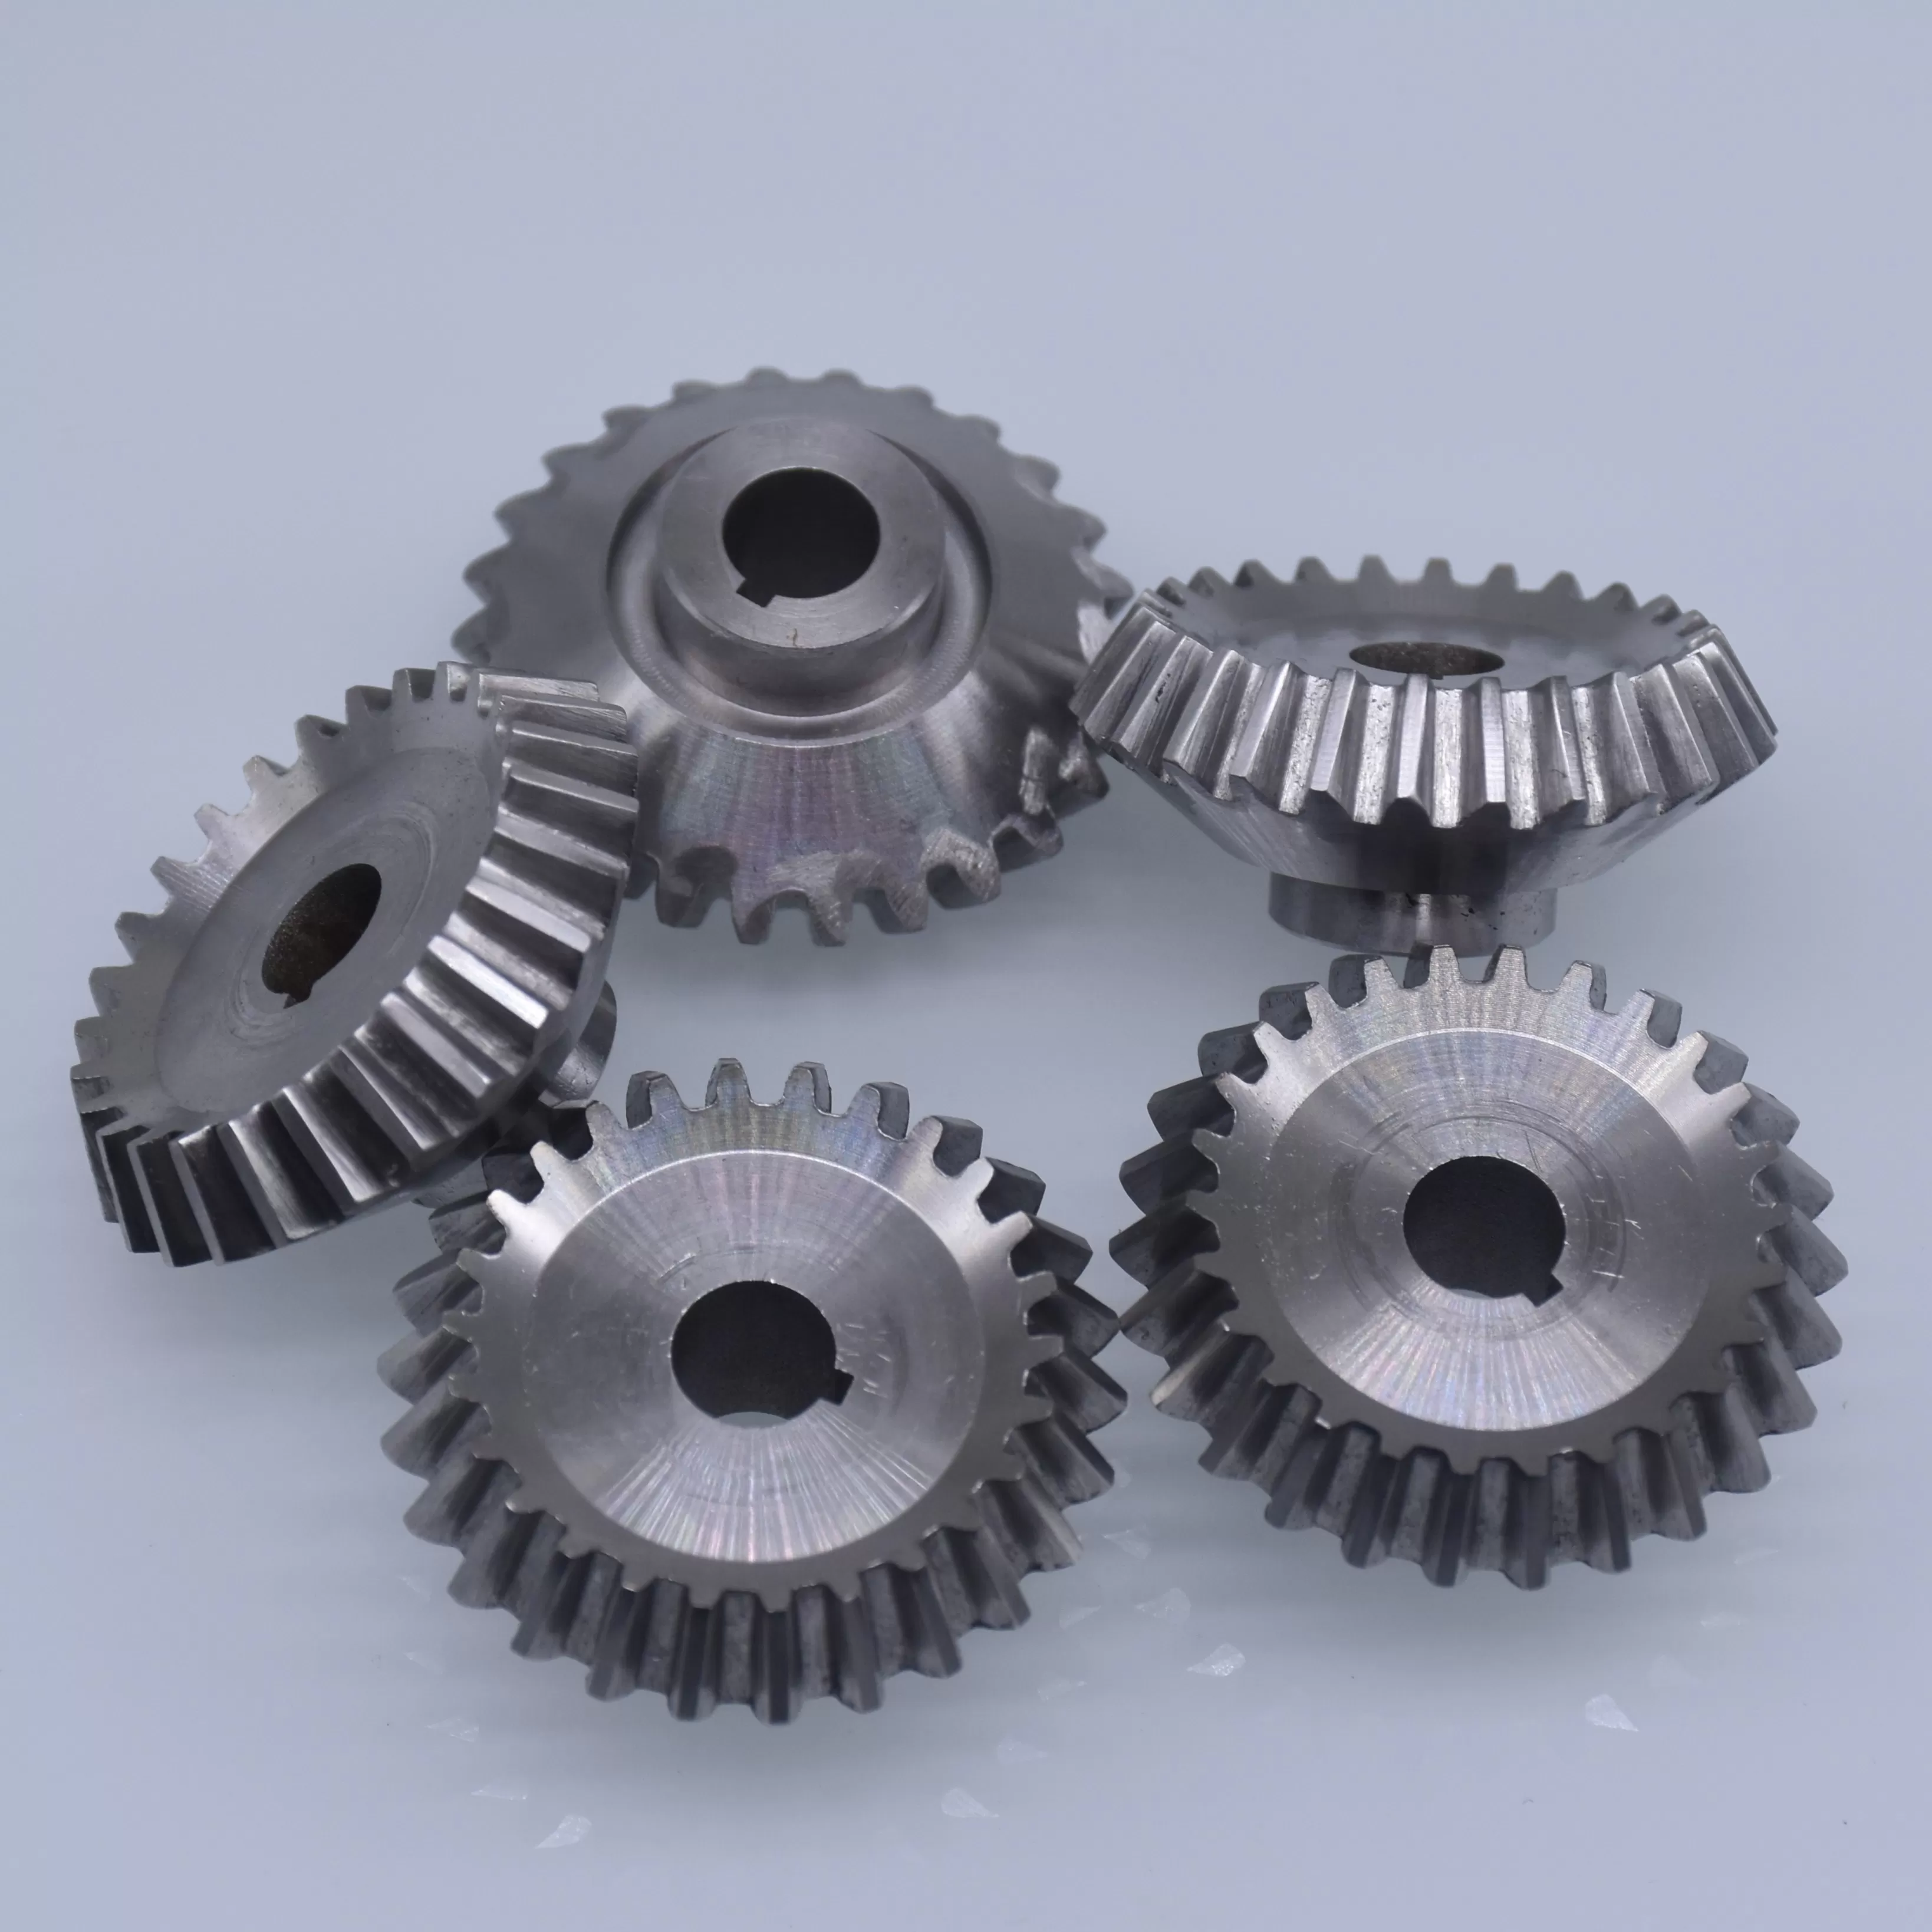 CNC turning stainless steel 304 gears